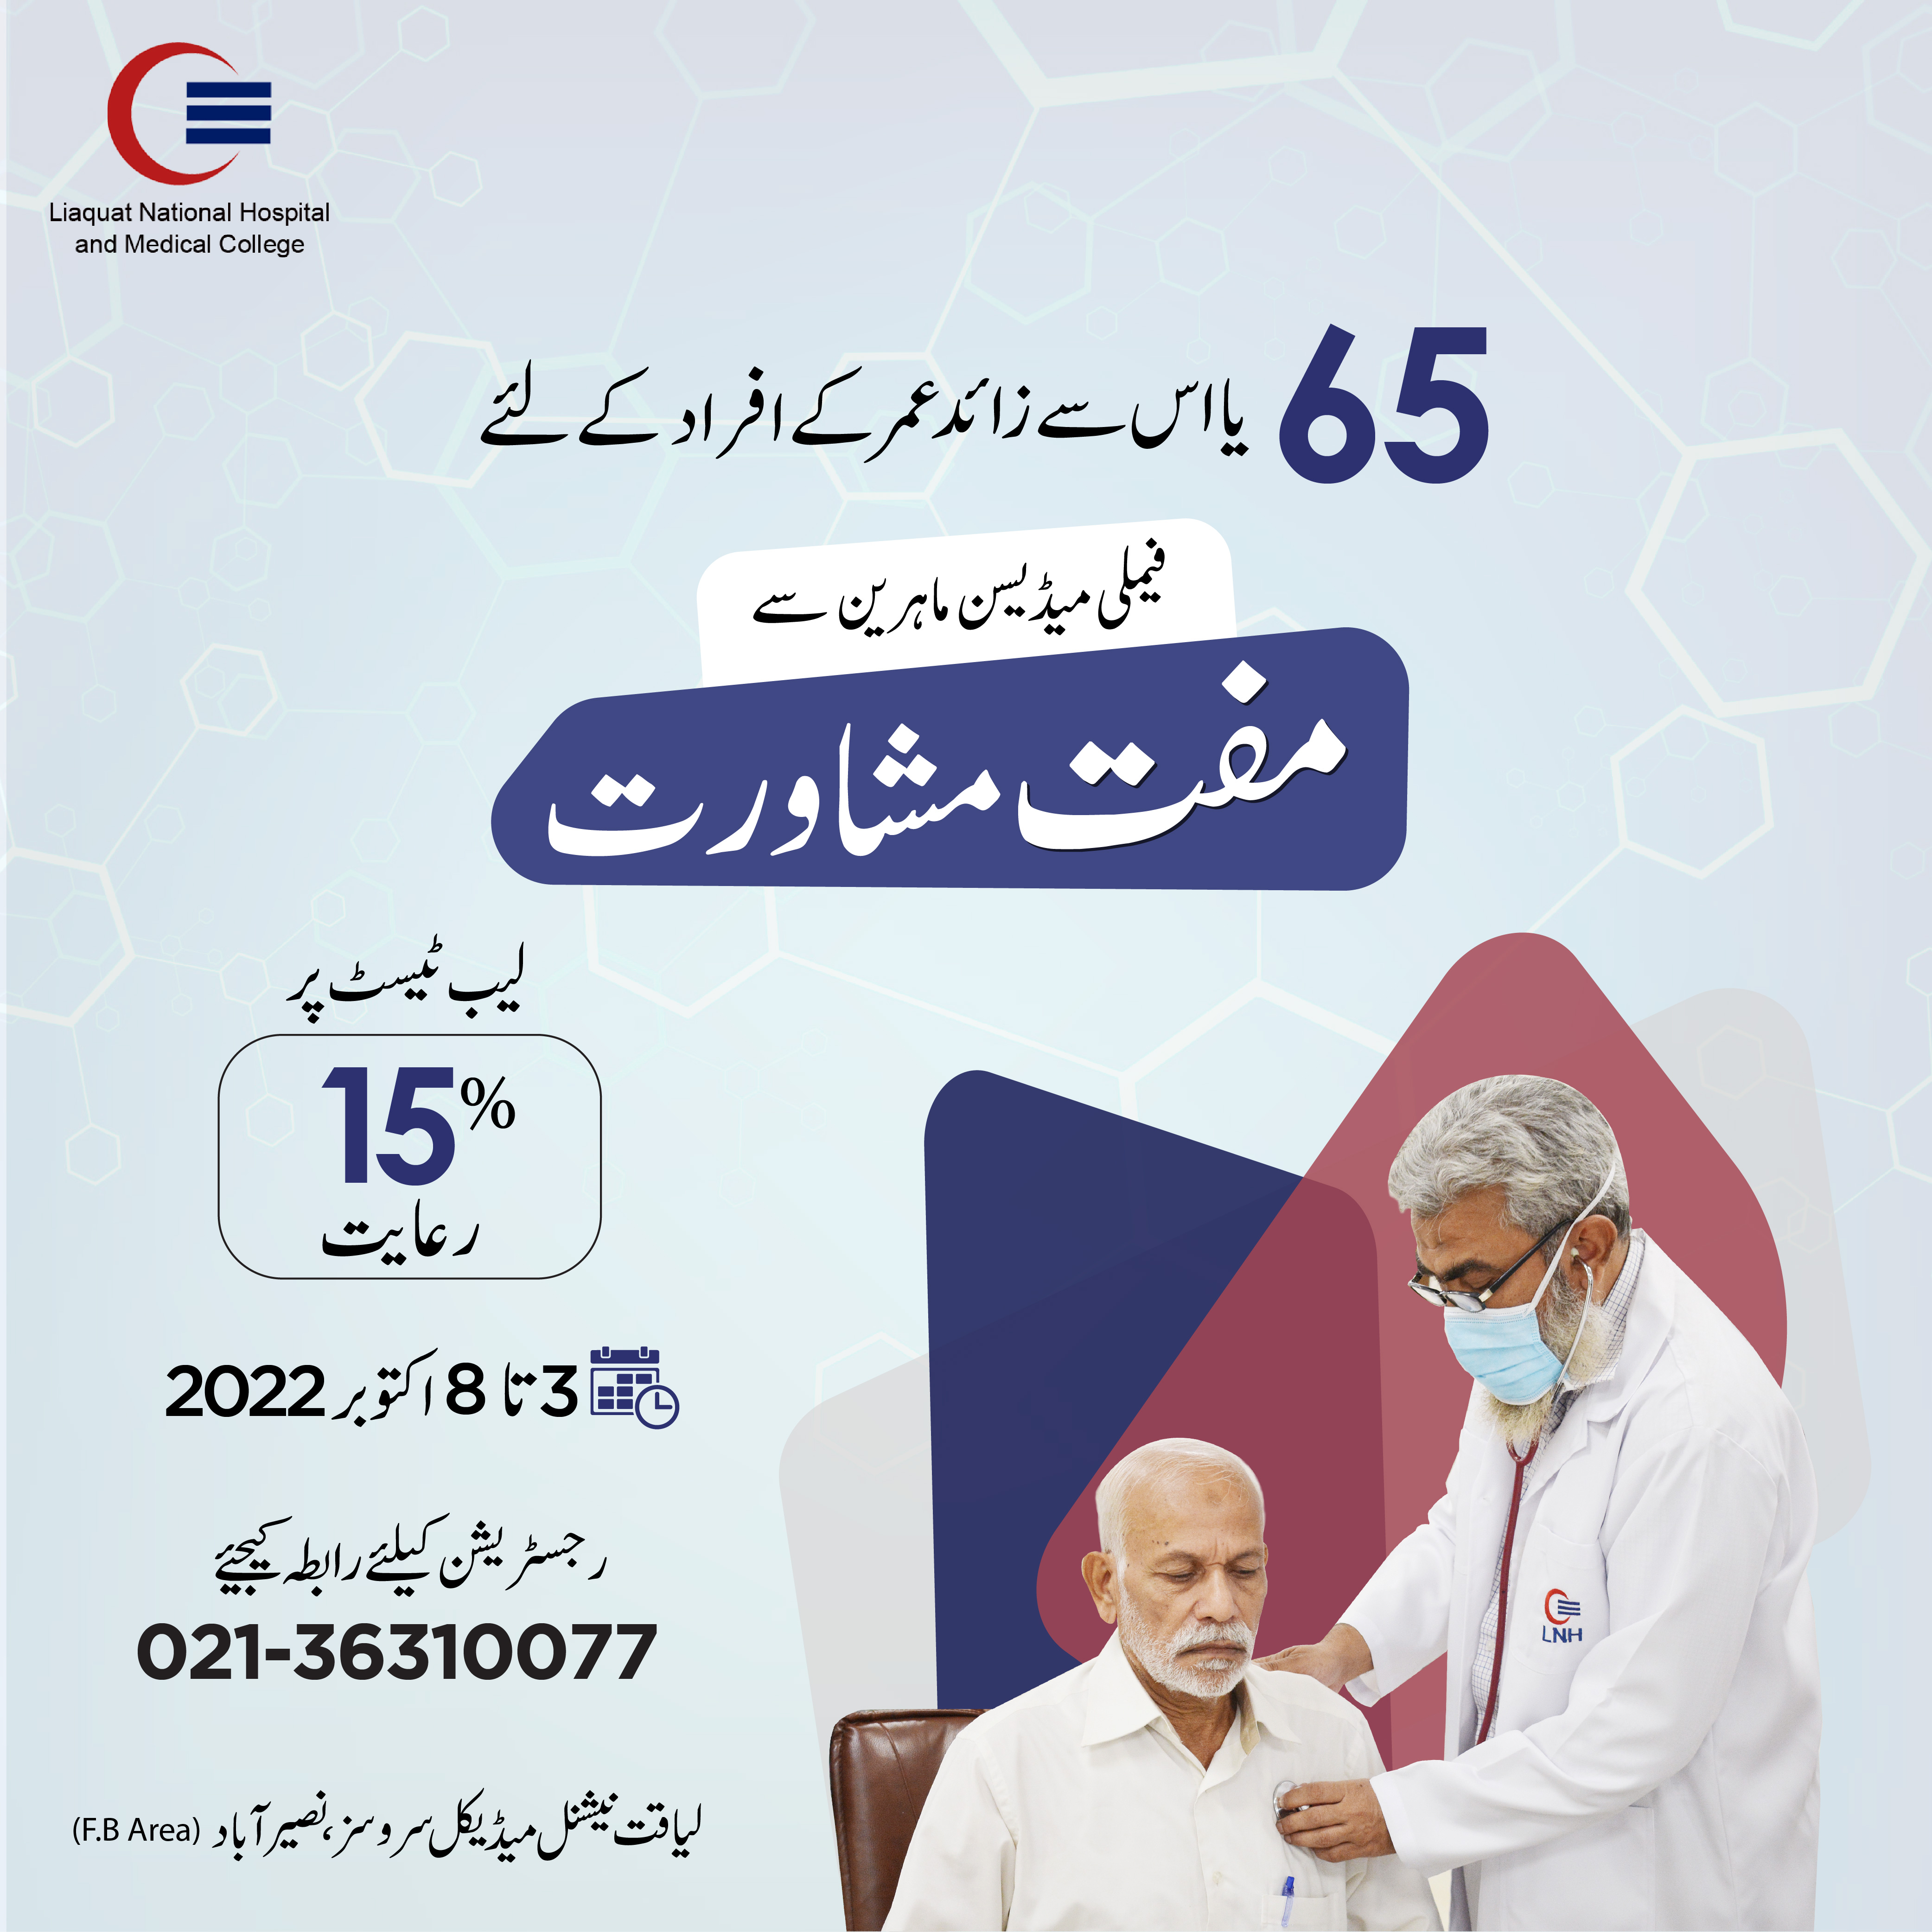 Free Medical Camp for People aged 65 years and above, Oct 3 - 8, 2022